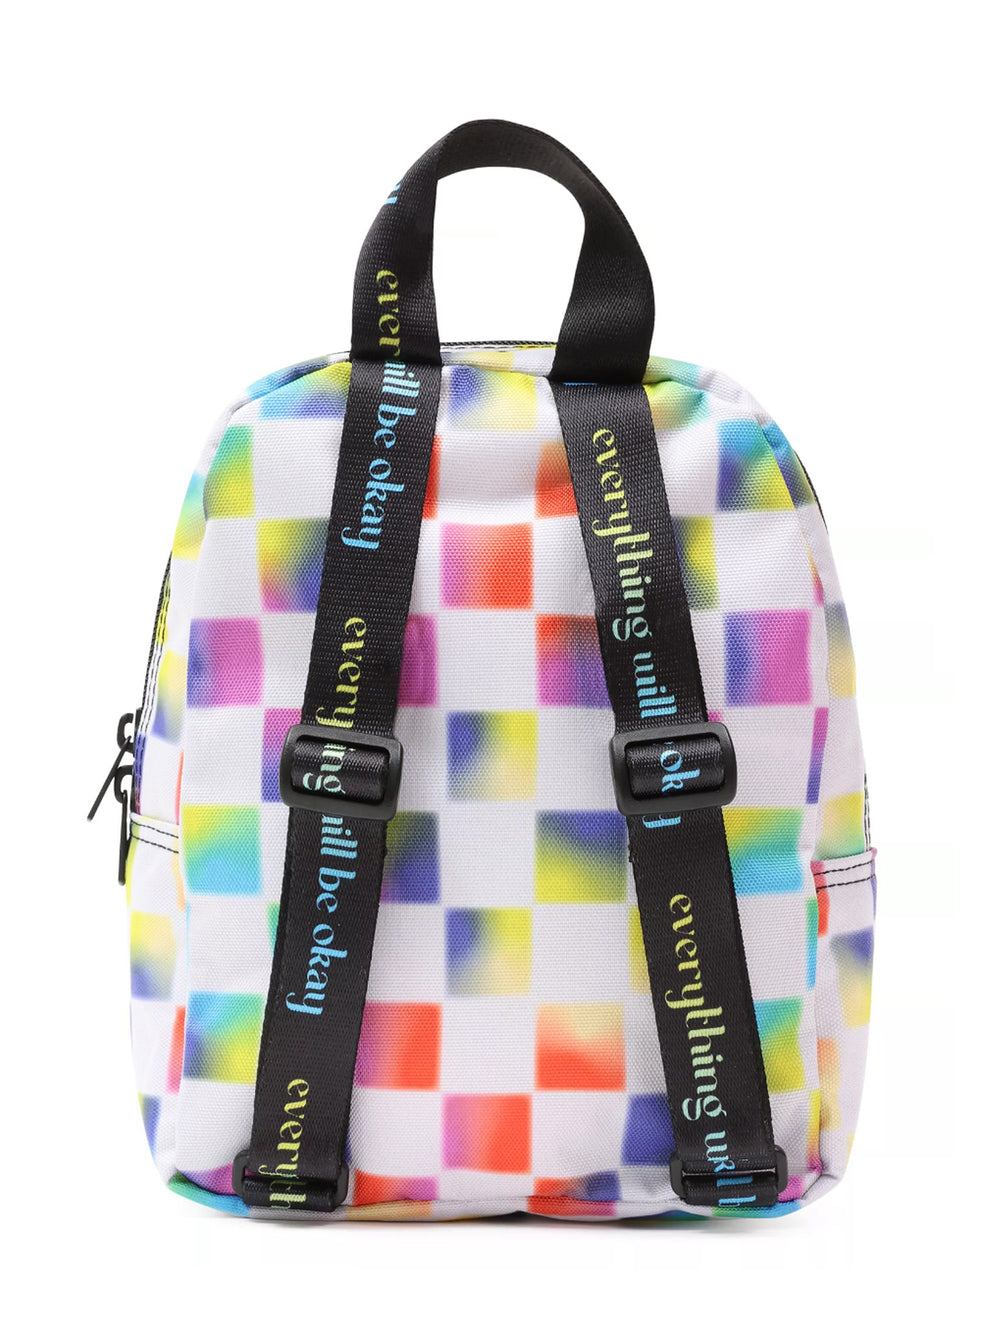 VANS CULTIVATE CARE MINI BACKPACK - CLEARANCE